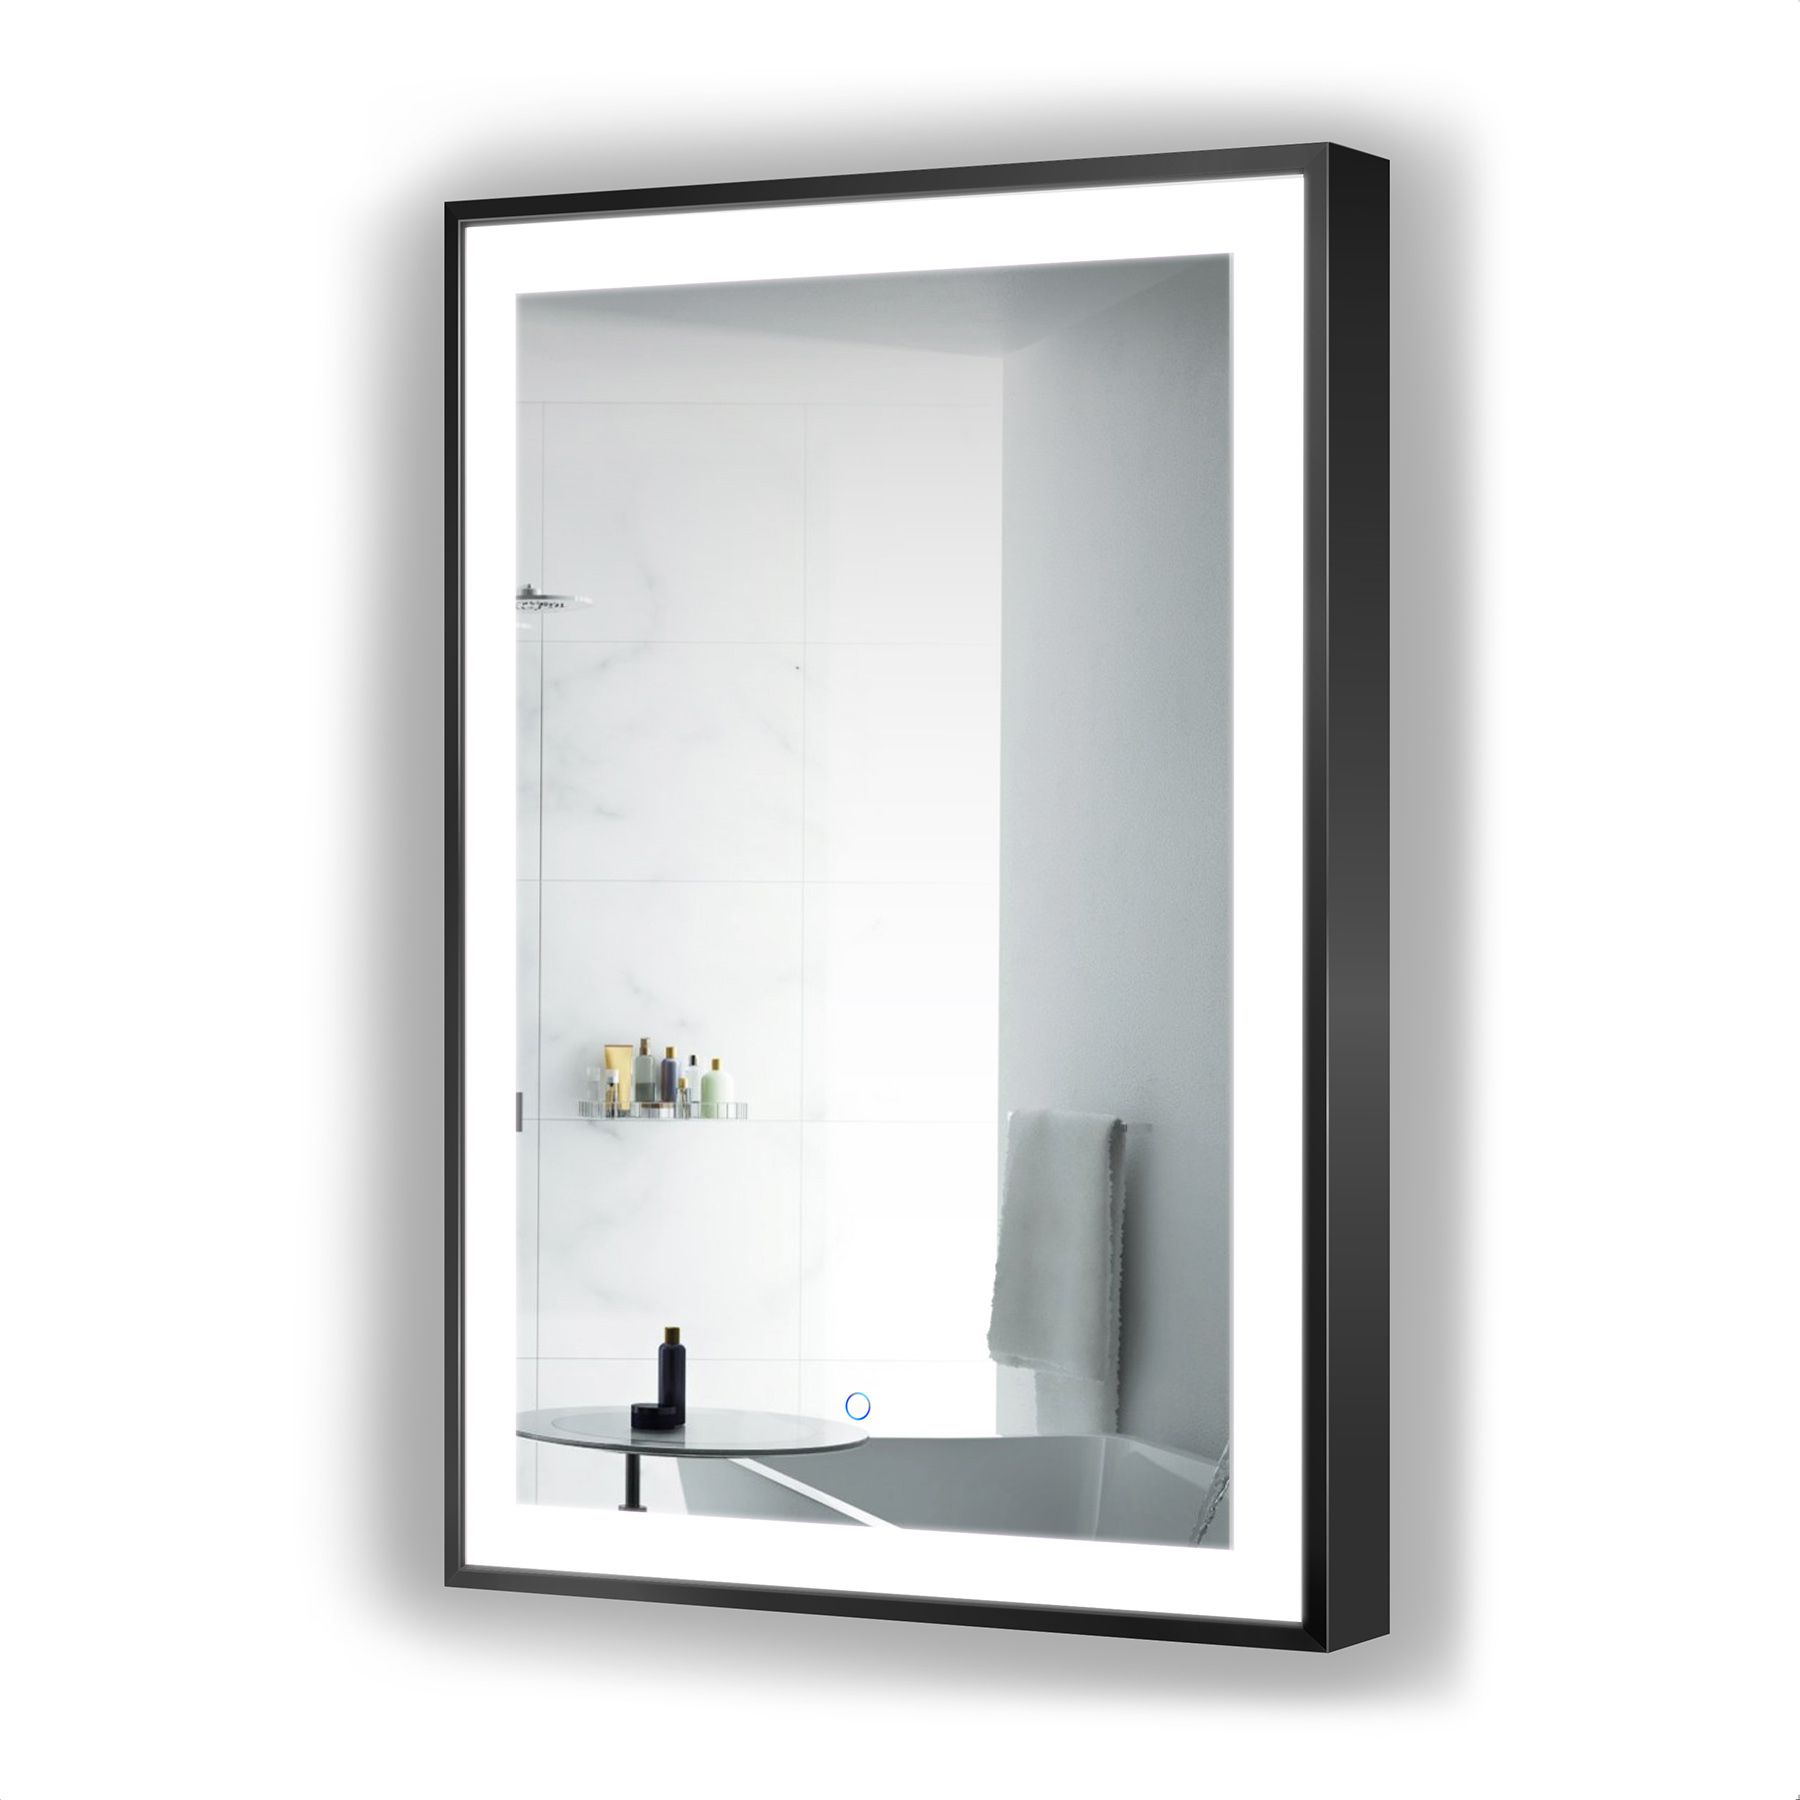 Krugg Soho Led Bathroom Mirror 24″ X 36″ Black – Krugg Reflections Usa Intended For Matte Black Octagon Led Wall Mirrors (View 3 of 15)